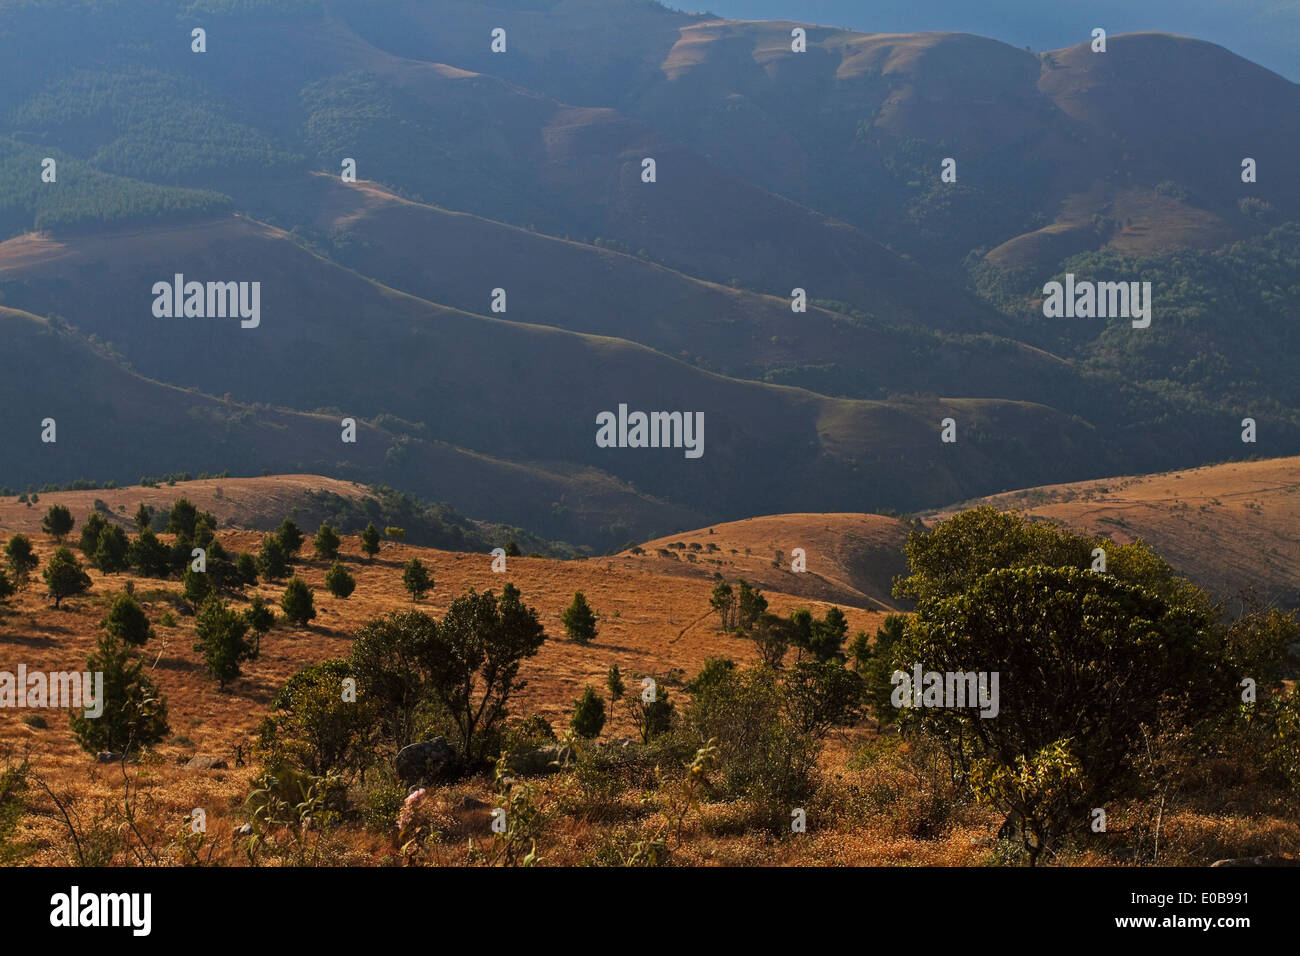 Mountain scenery from Mount Sheba to Pilgrim's Rest in the northern Drakensberg Mpumalanga, Stock Photo